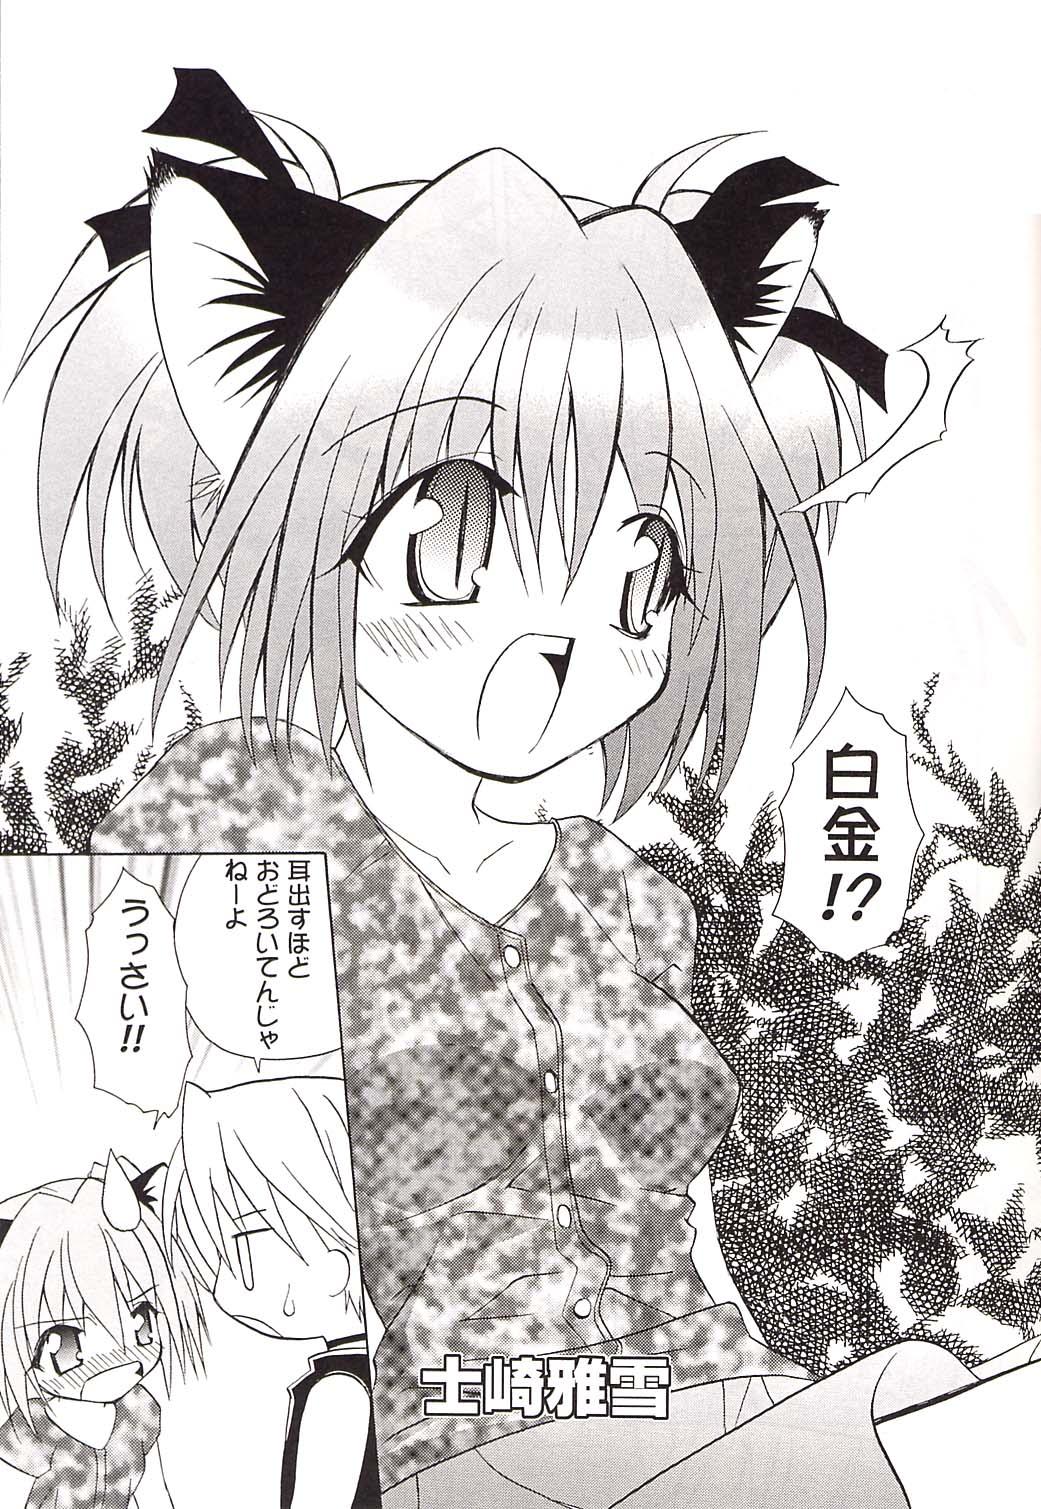 Yanks Featured Strawberry sex - Tokyo mew mew Beard - Page 6